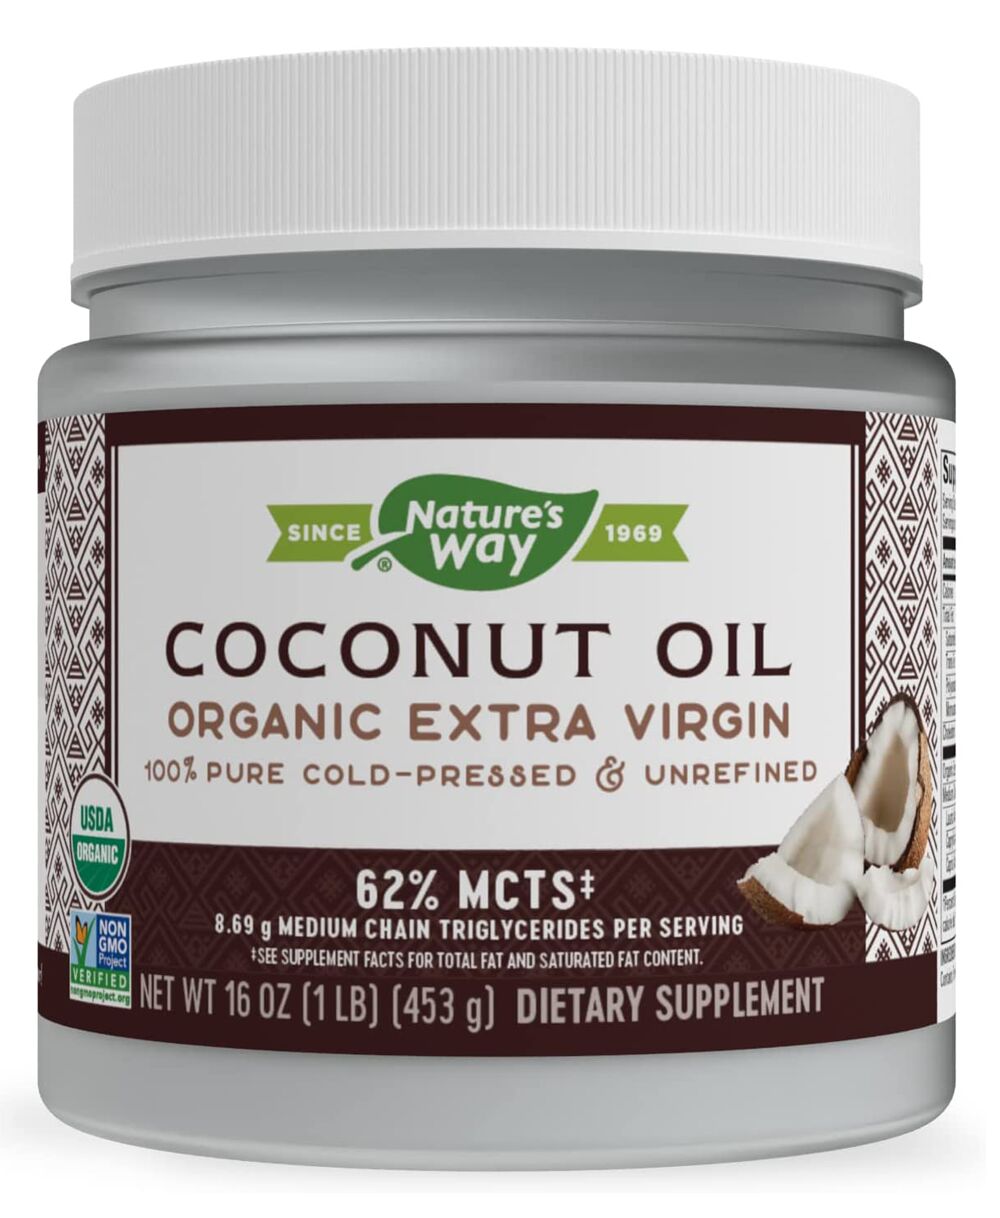 Nature's Way MCT Oil, Brain and Body Fuel from Coconuts*; Keto and Paleo  Certified, Organic, Gluten Free, Non-GMO Project Verified, 16 Fl. Oz.